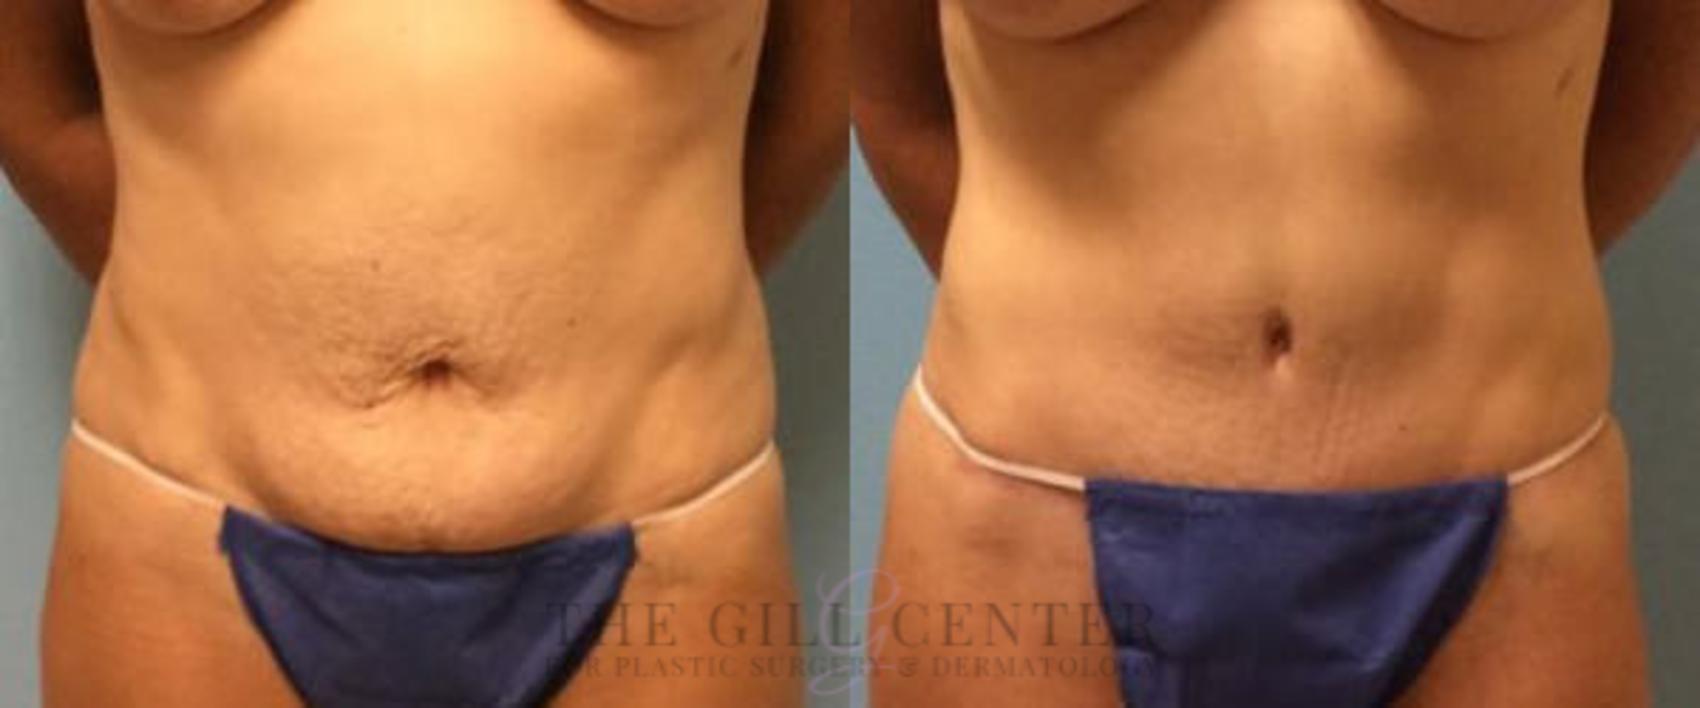 Tummy Tuck Case 187 Before & After Front | The Woodlands, TX | The Gill Center for Plastic Surgery and Dermatology